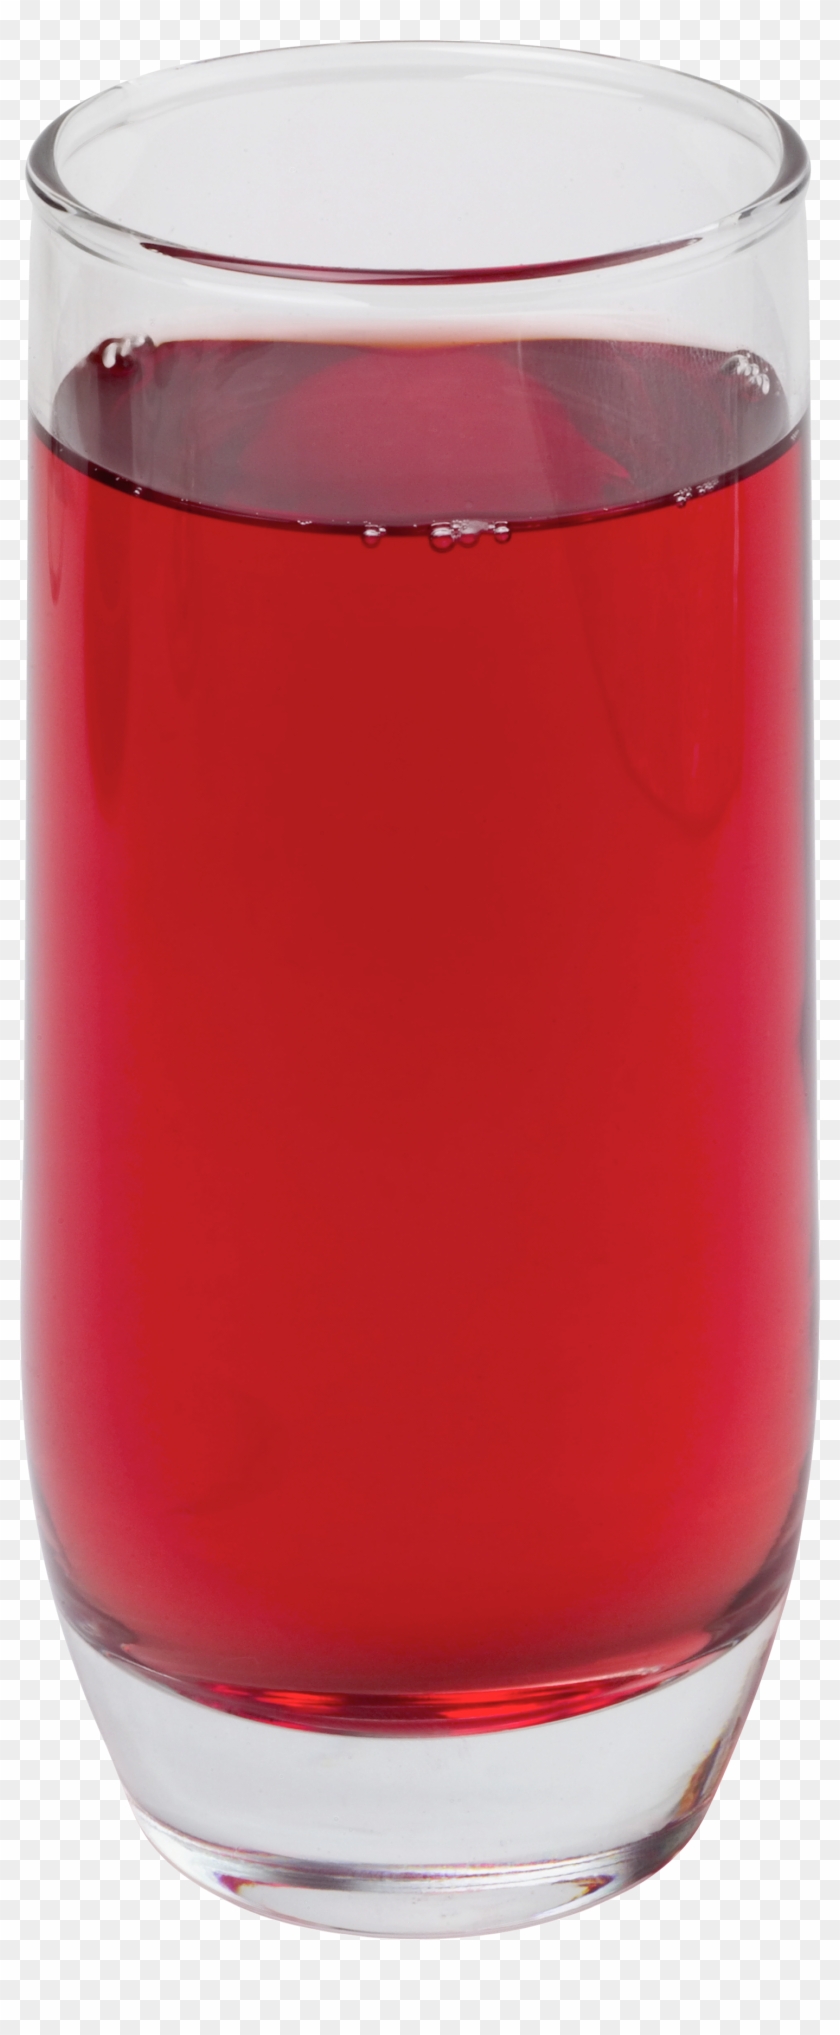 Juice Png Image - Glass Of Red Juice Png Clipart #270013